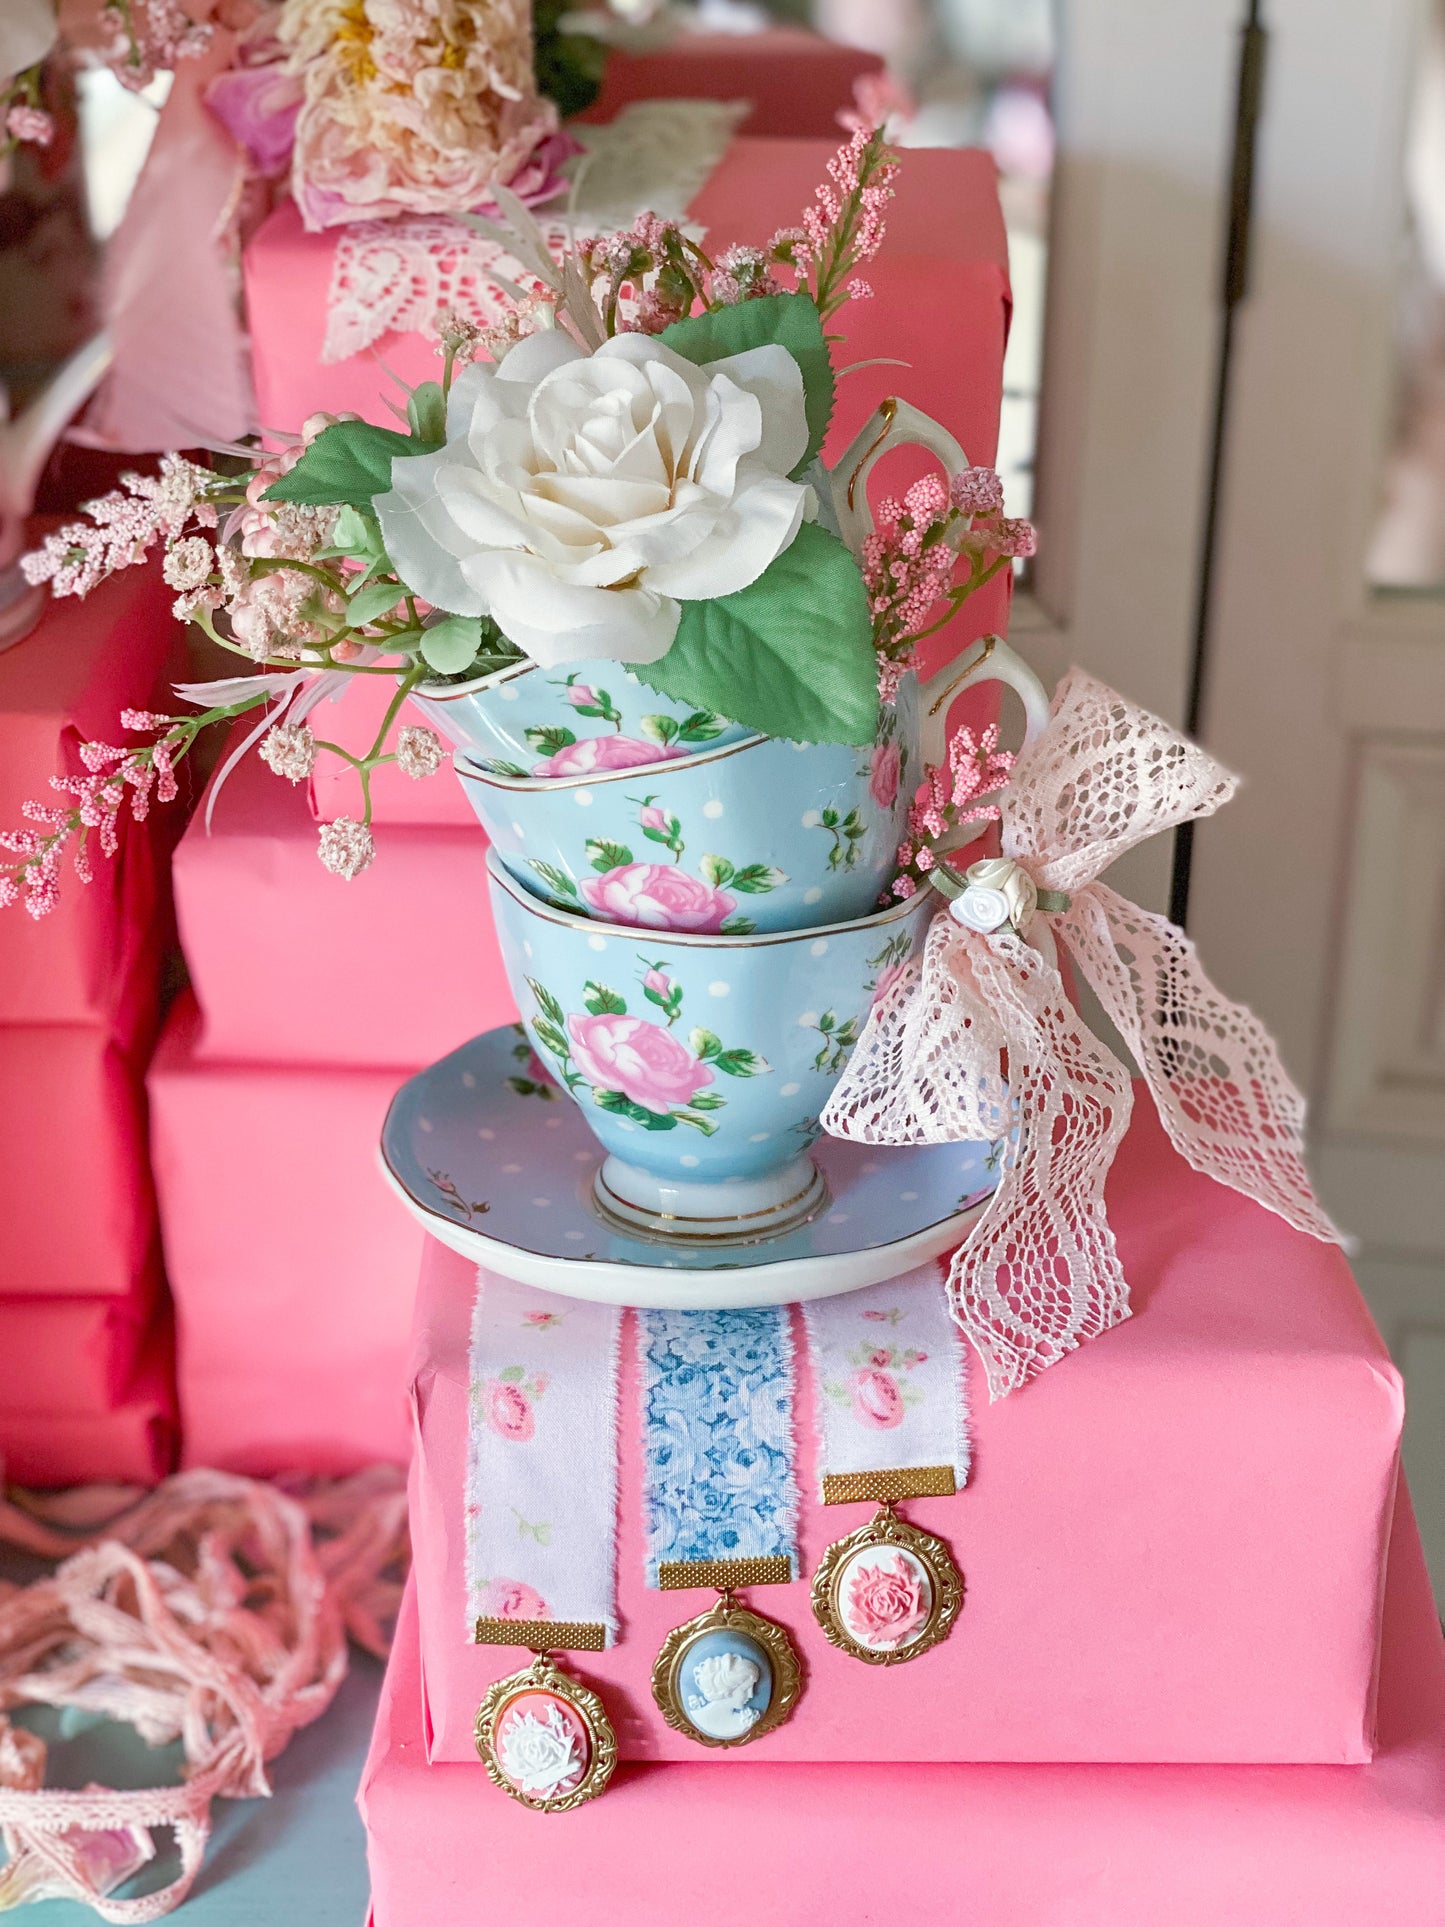 Bespoke Pastel Blue & Pink Stacked Royal Albert Style Shabby Chic Tea cups with Floral Arrangement